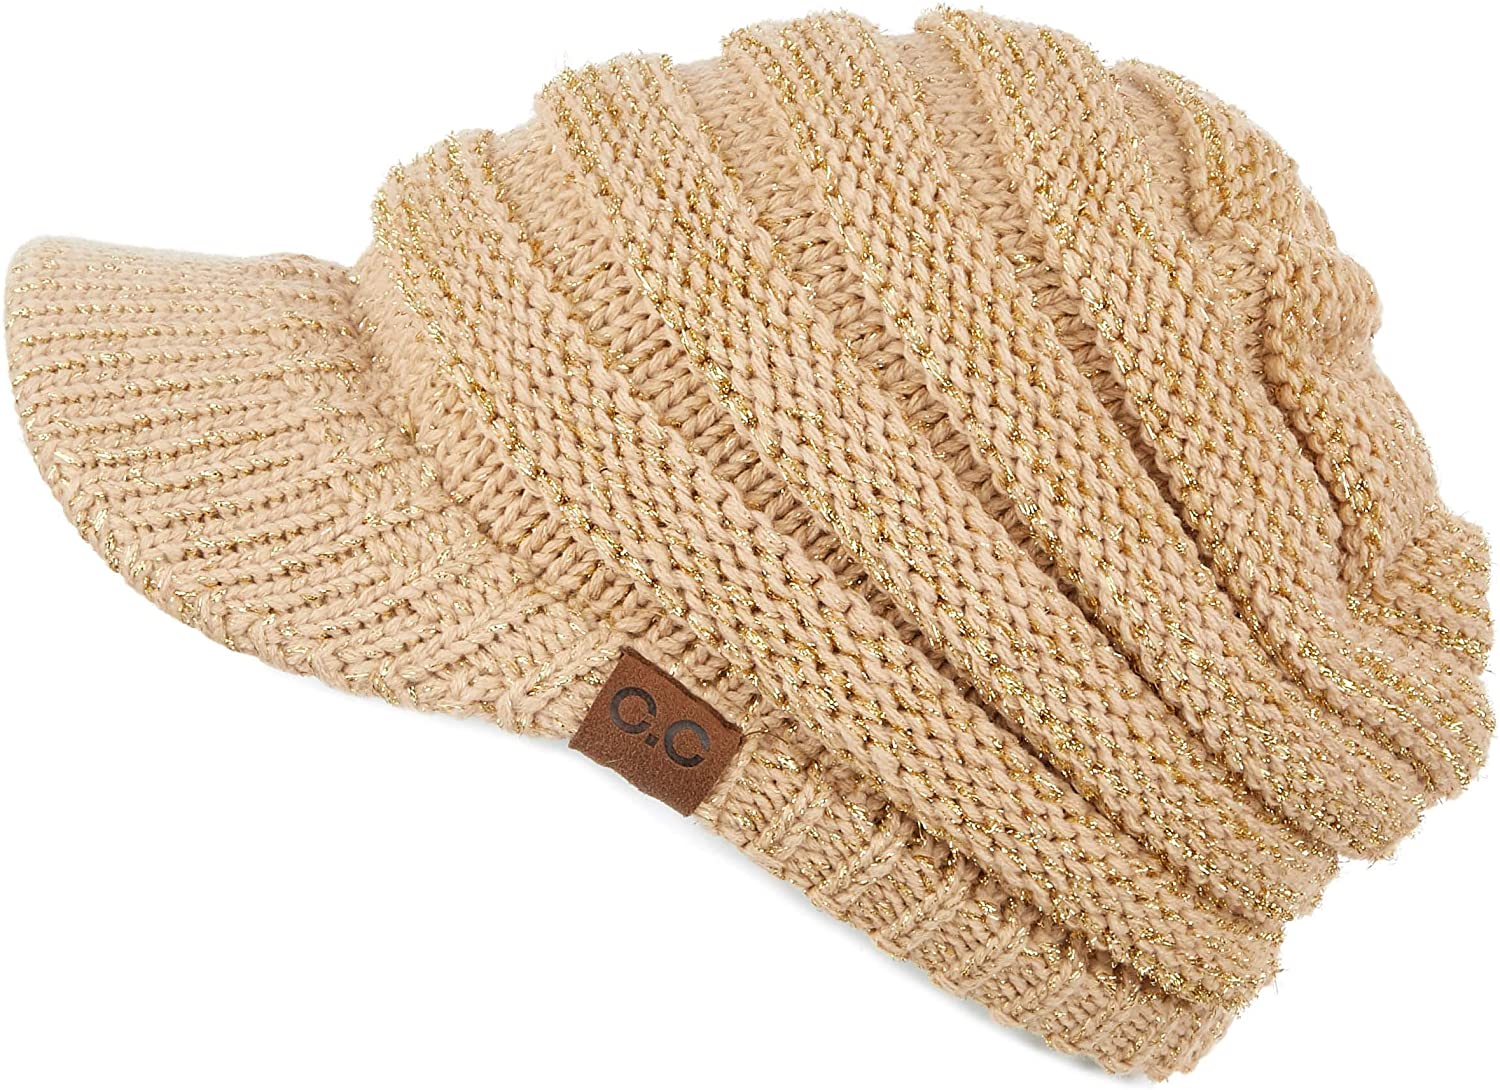 C.C Hatsandscarf Exclusives Women's Ribbed Knit Hat with Brim 